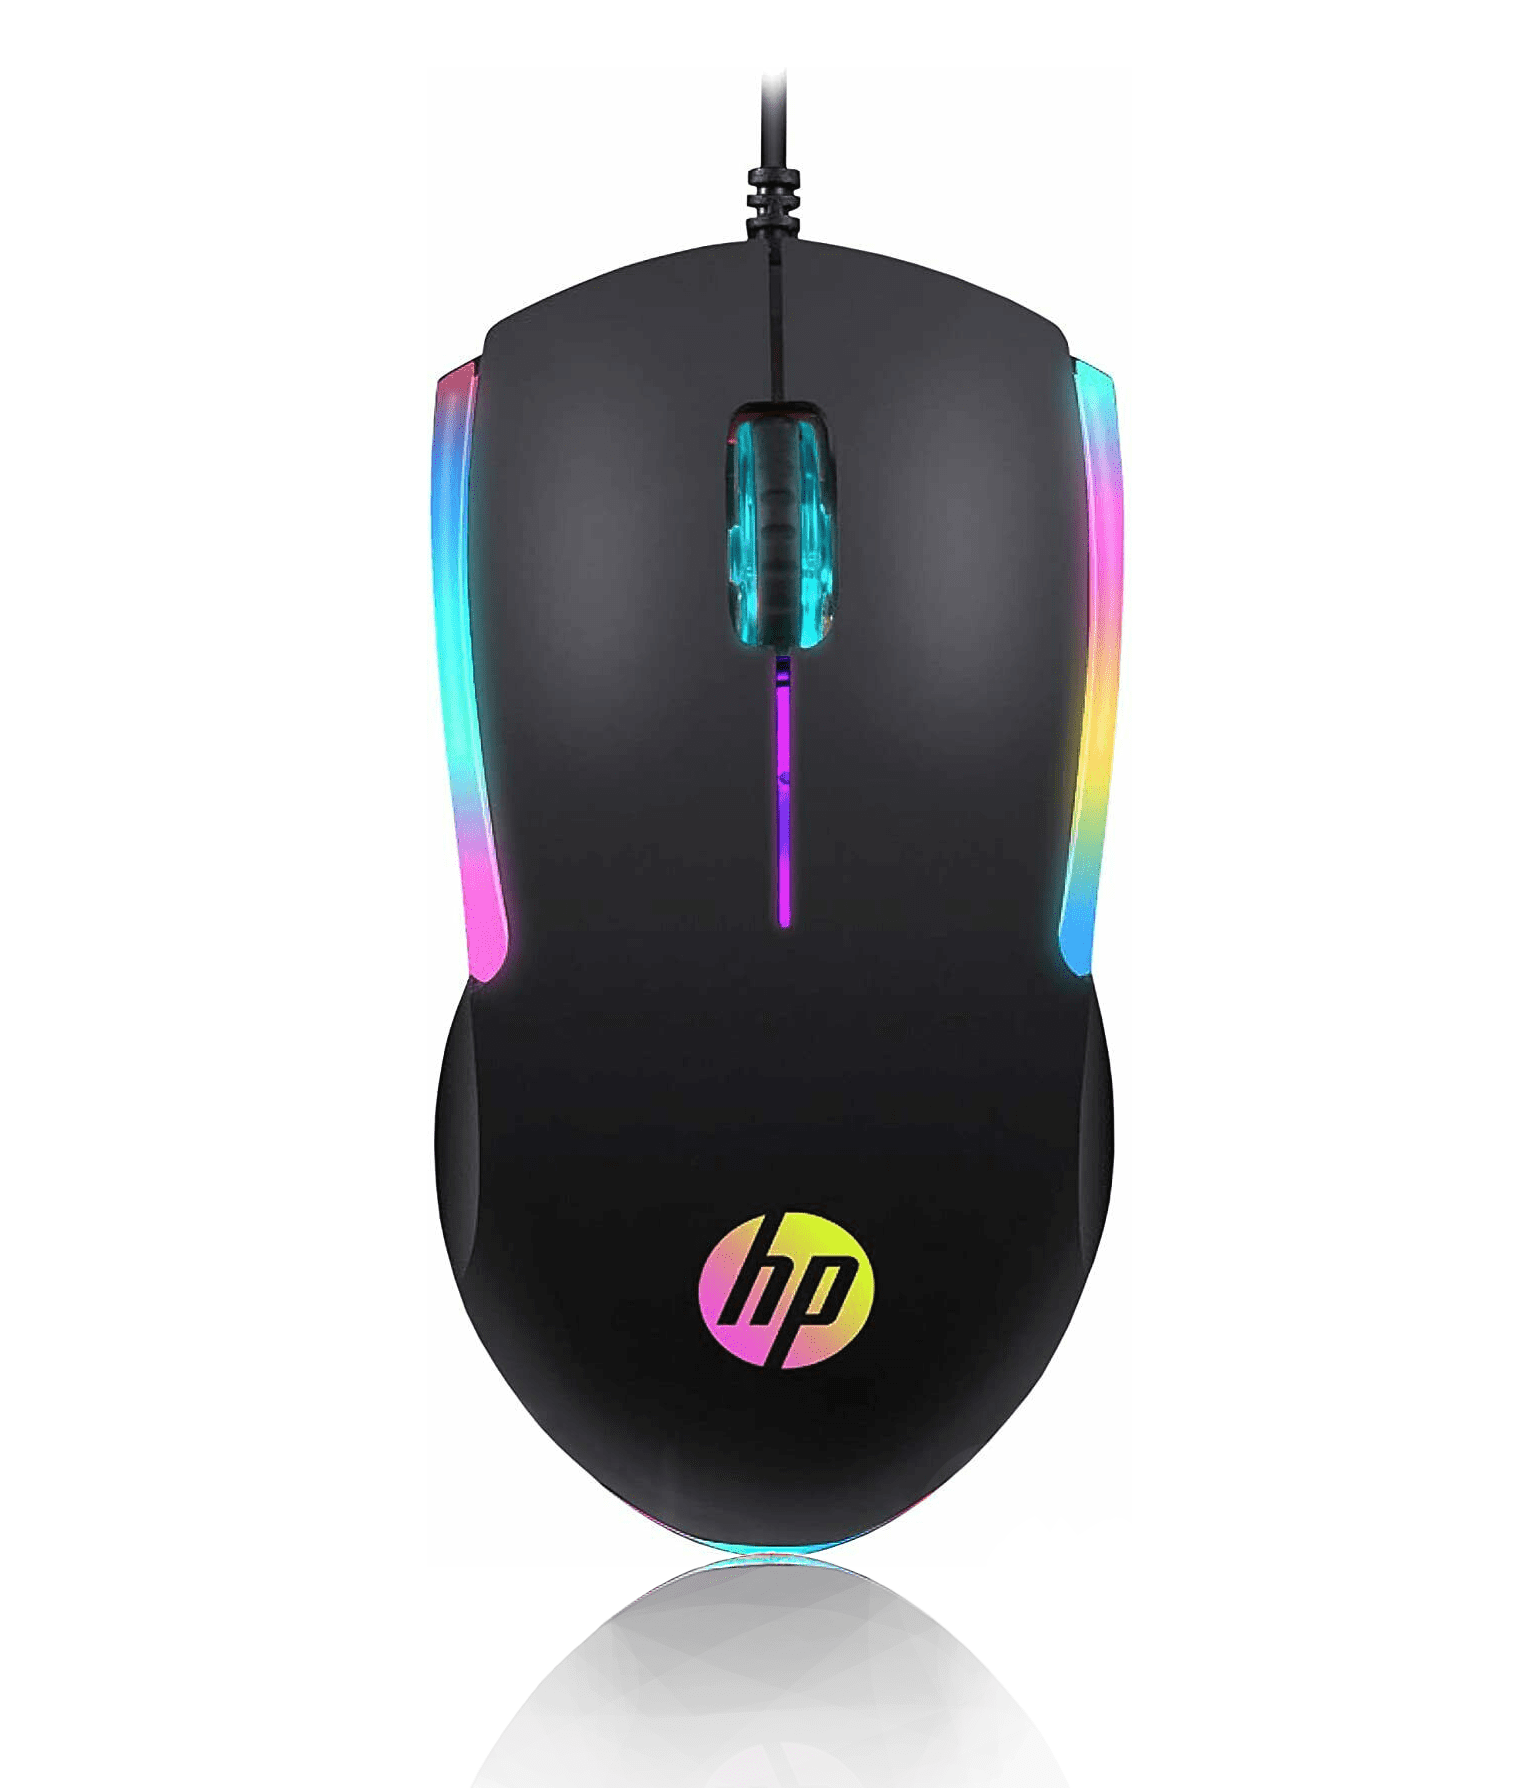 onderzeeër droefheid morgen HP Wired RGB Gaming Mouse with Optical Sensor, 3 Buttons, 7 Color LED for  Computer Notebook Laptop Office PC Home Precese Gaming Mouse - M160 -  Walmart.com